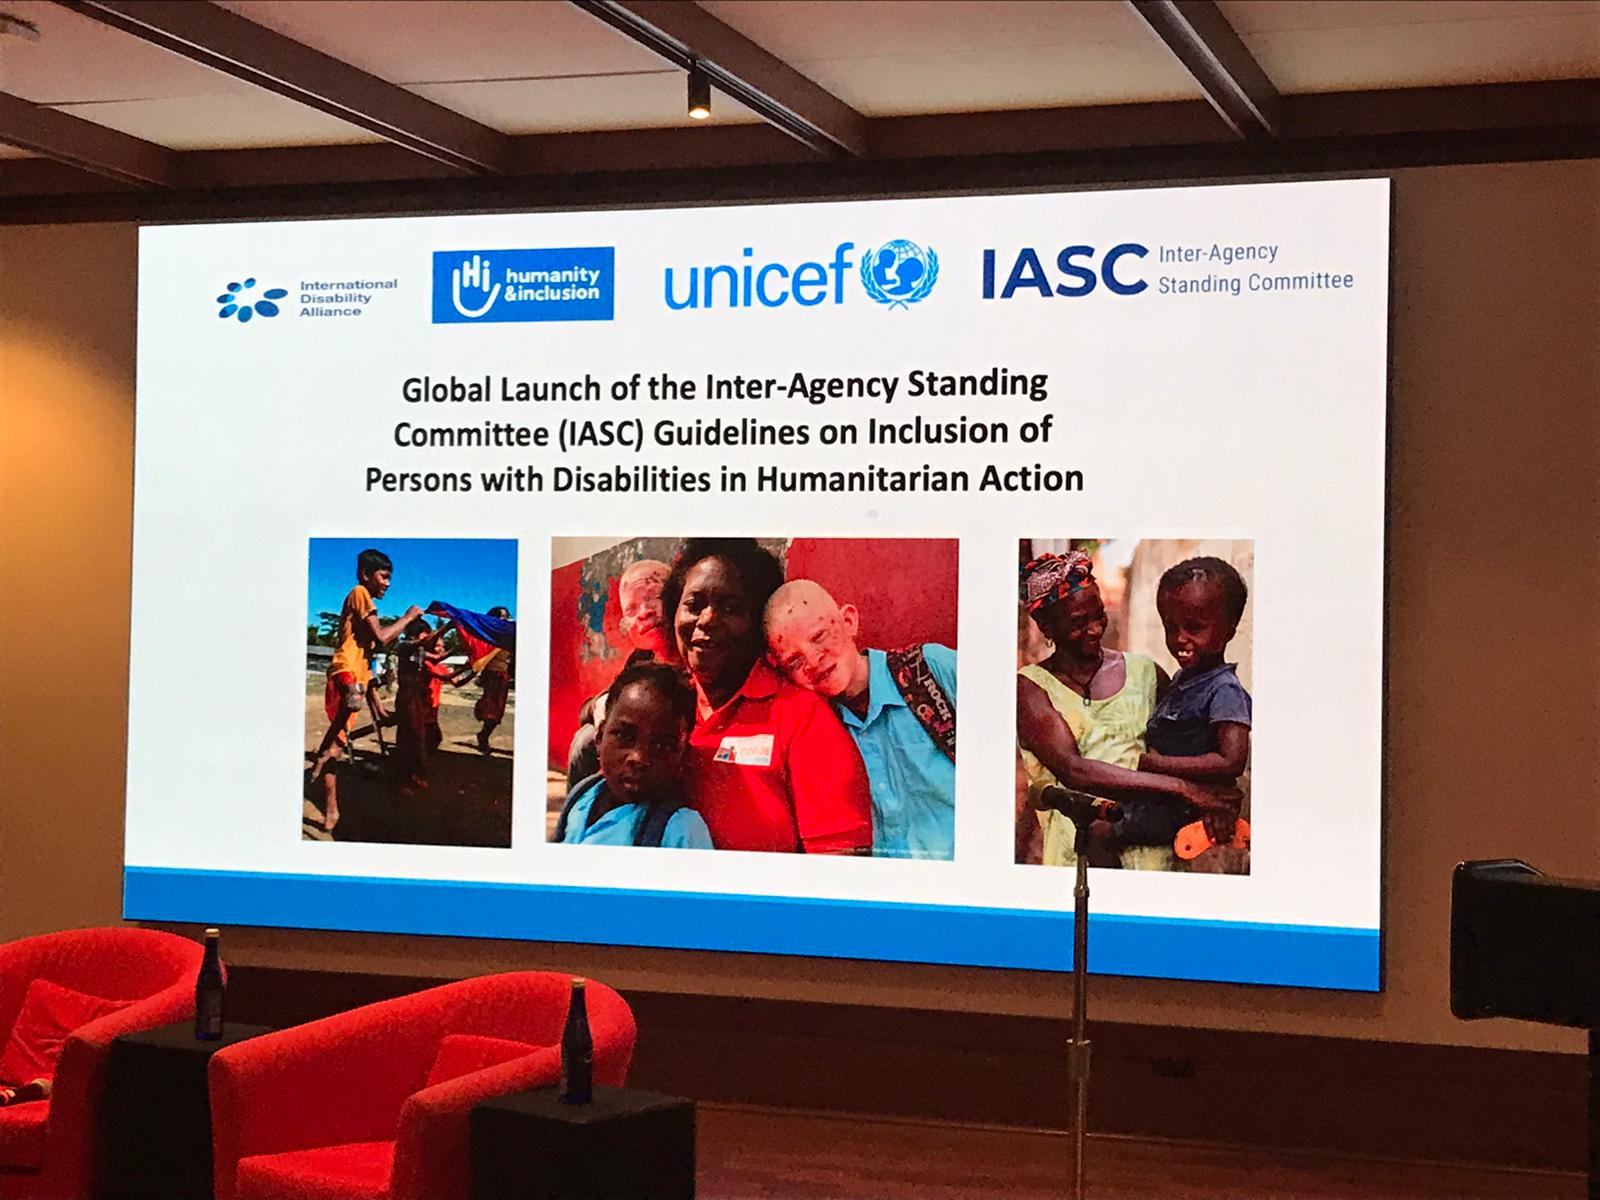 Global launch of the IASC guidelines in New York (November, 2019). Event room with the backdrop of the event.